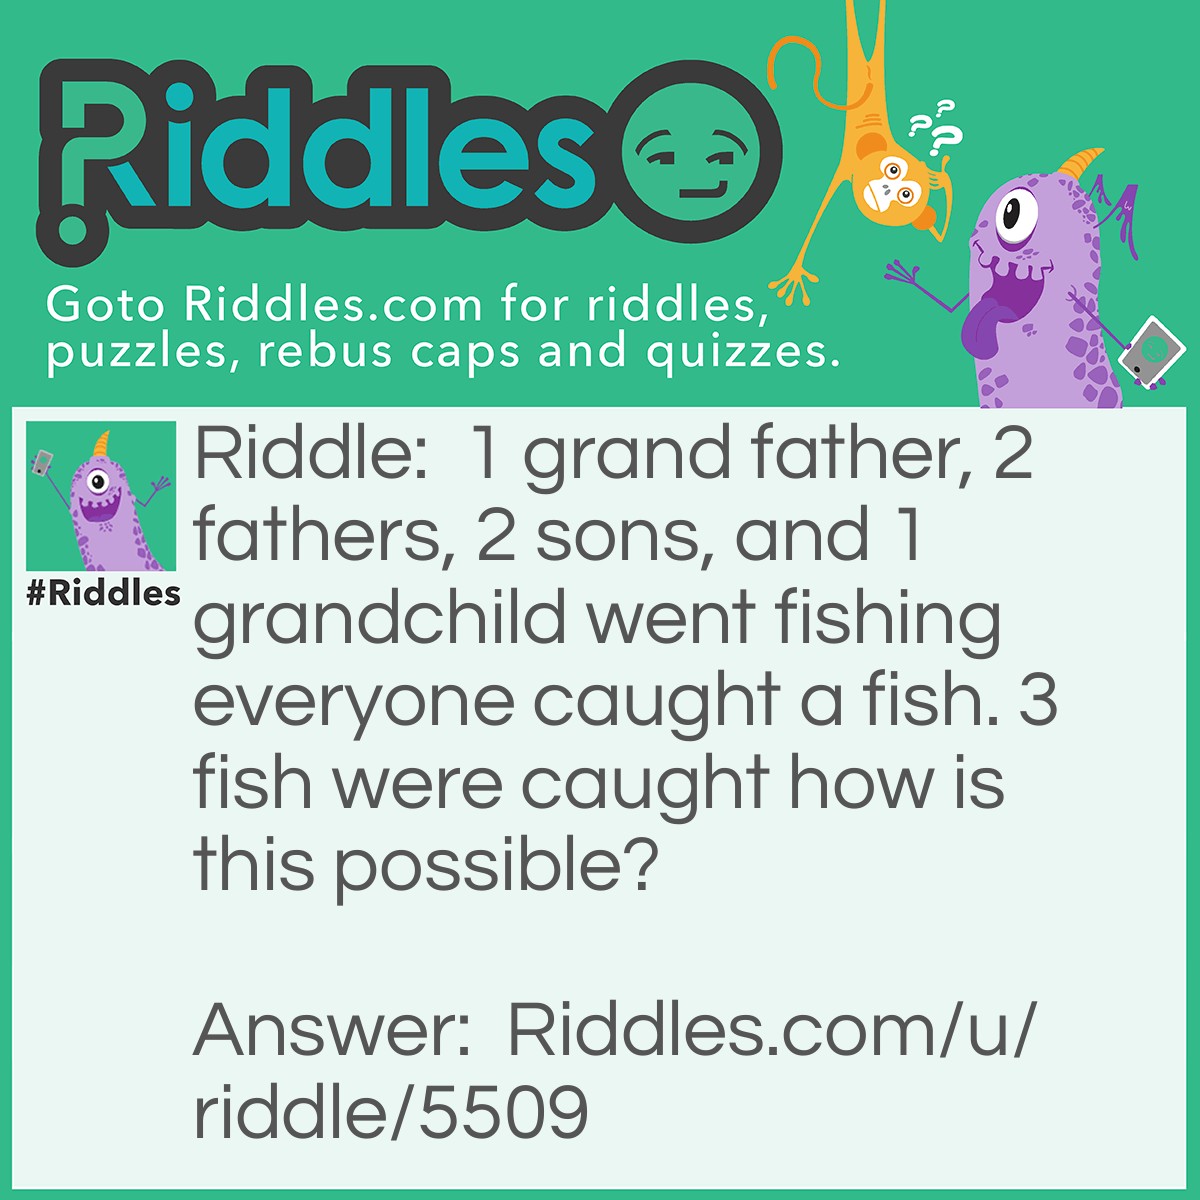 Riddle: 1 grand father, 2 fathers, 2 sons, and 1 grandchild went fishing everyone caught a fish. 3 fish were caught how is this possible? Answer: The grandfather, who is also a father had a son who is also a father, who had a son (which makes 1 grandfather, 2 fathers, 2 sons, and 1 grandchild)